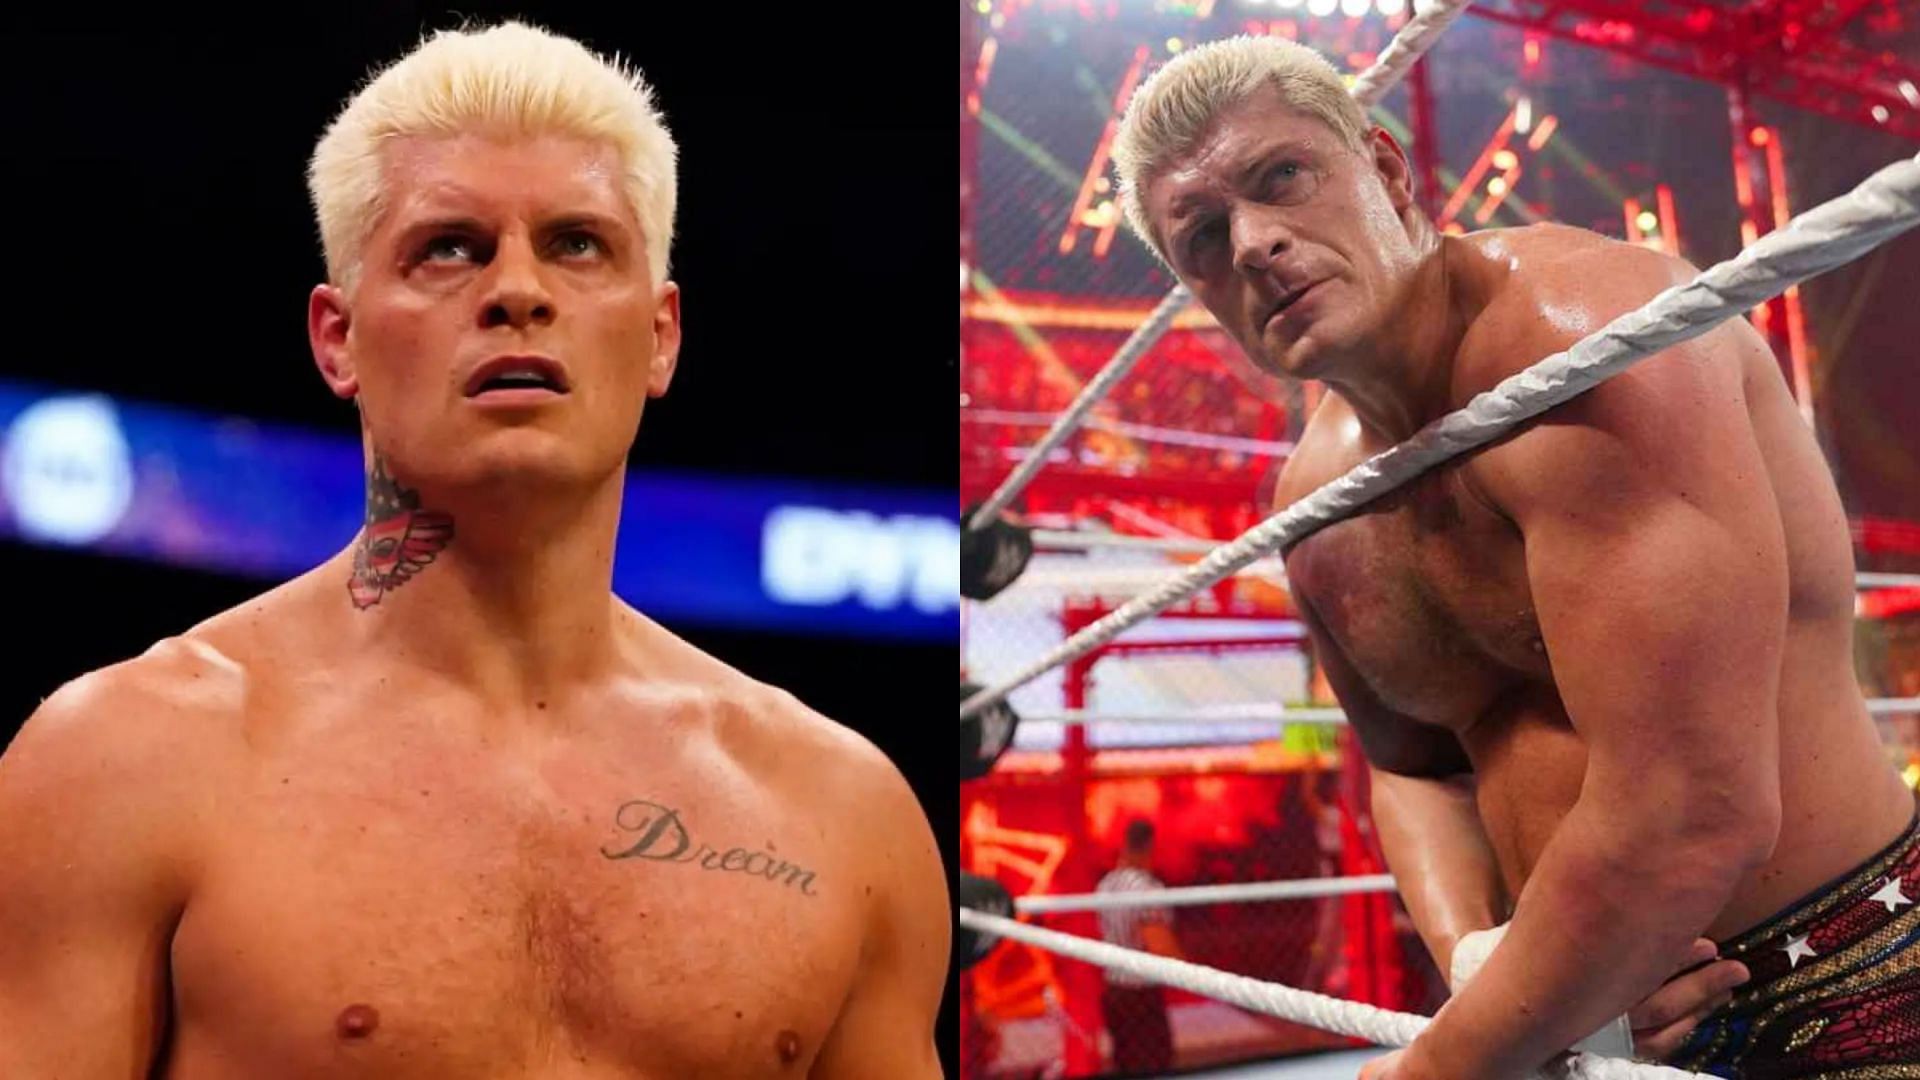 Cody Rhodes lost to Roman Reigns at WWE WrestleMania 39